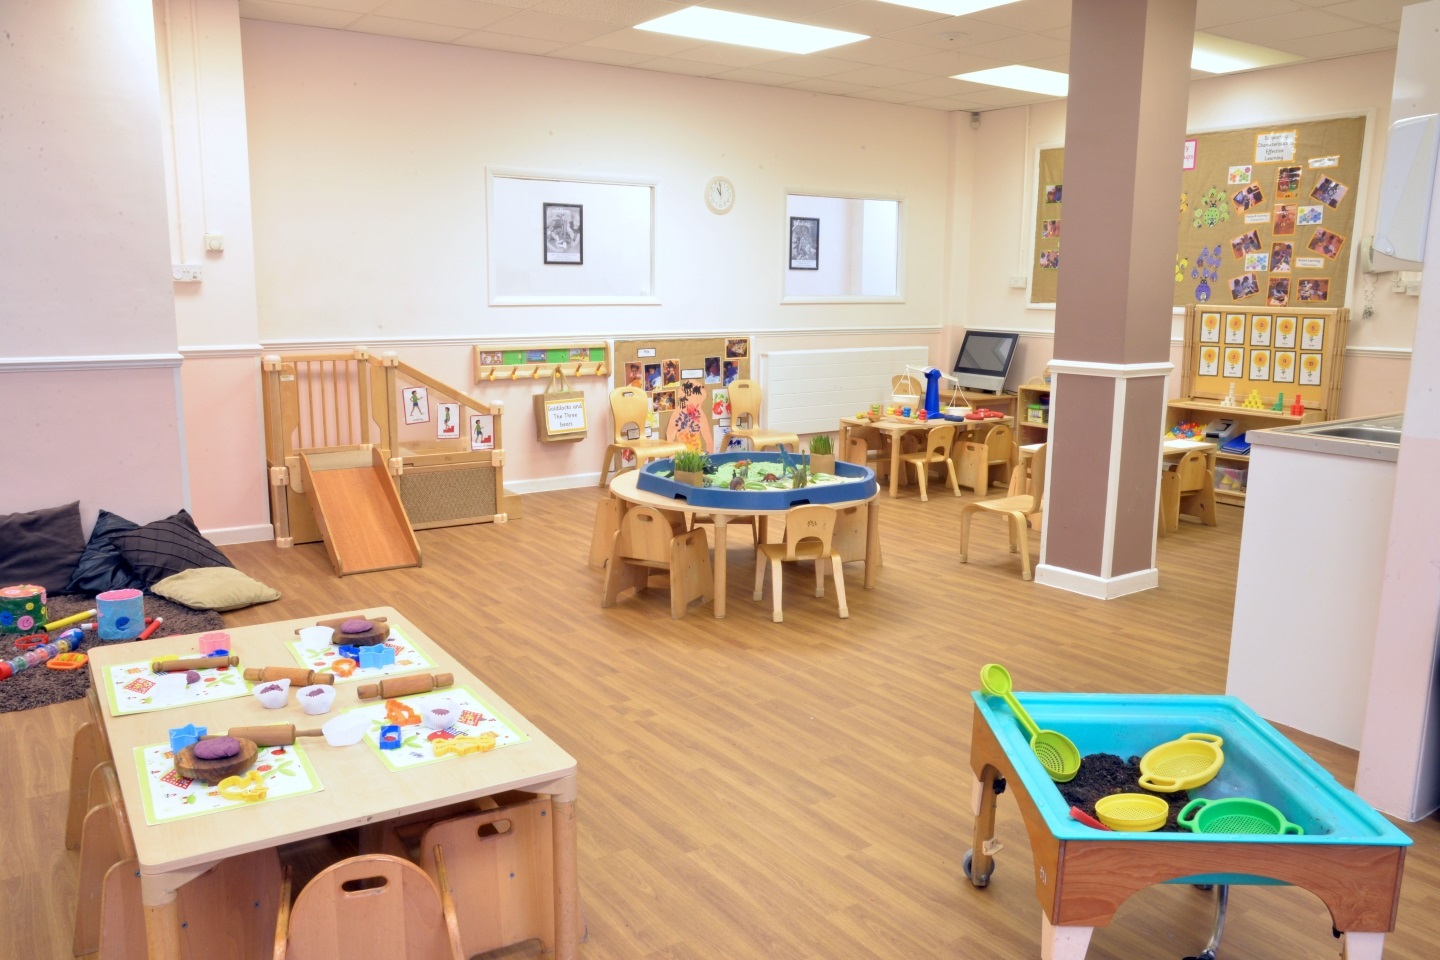 Bright Horizons Hounslow Day Nursery and Preschool Middlesex 03300 579159